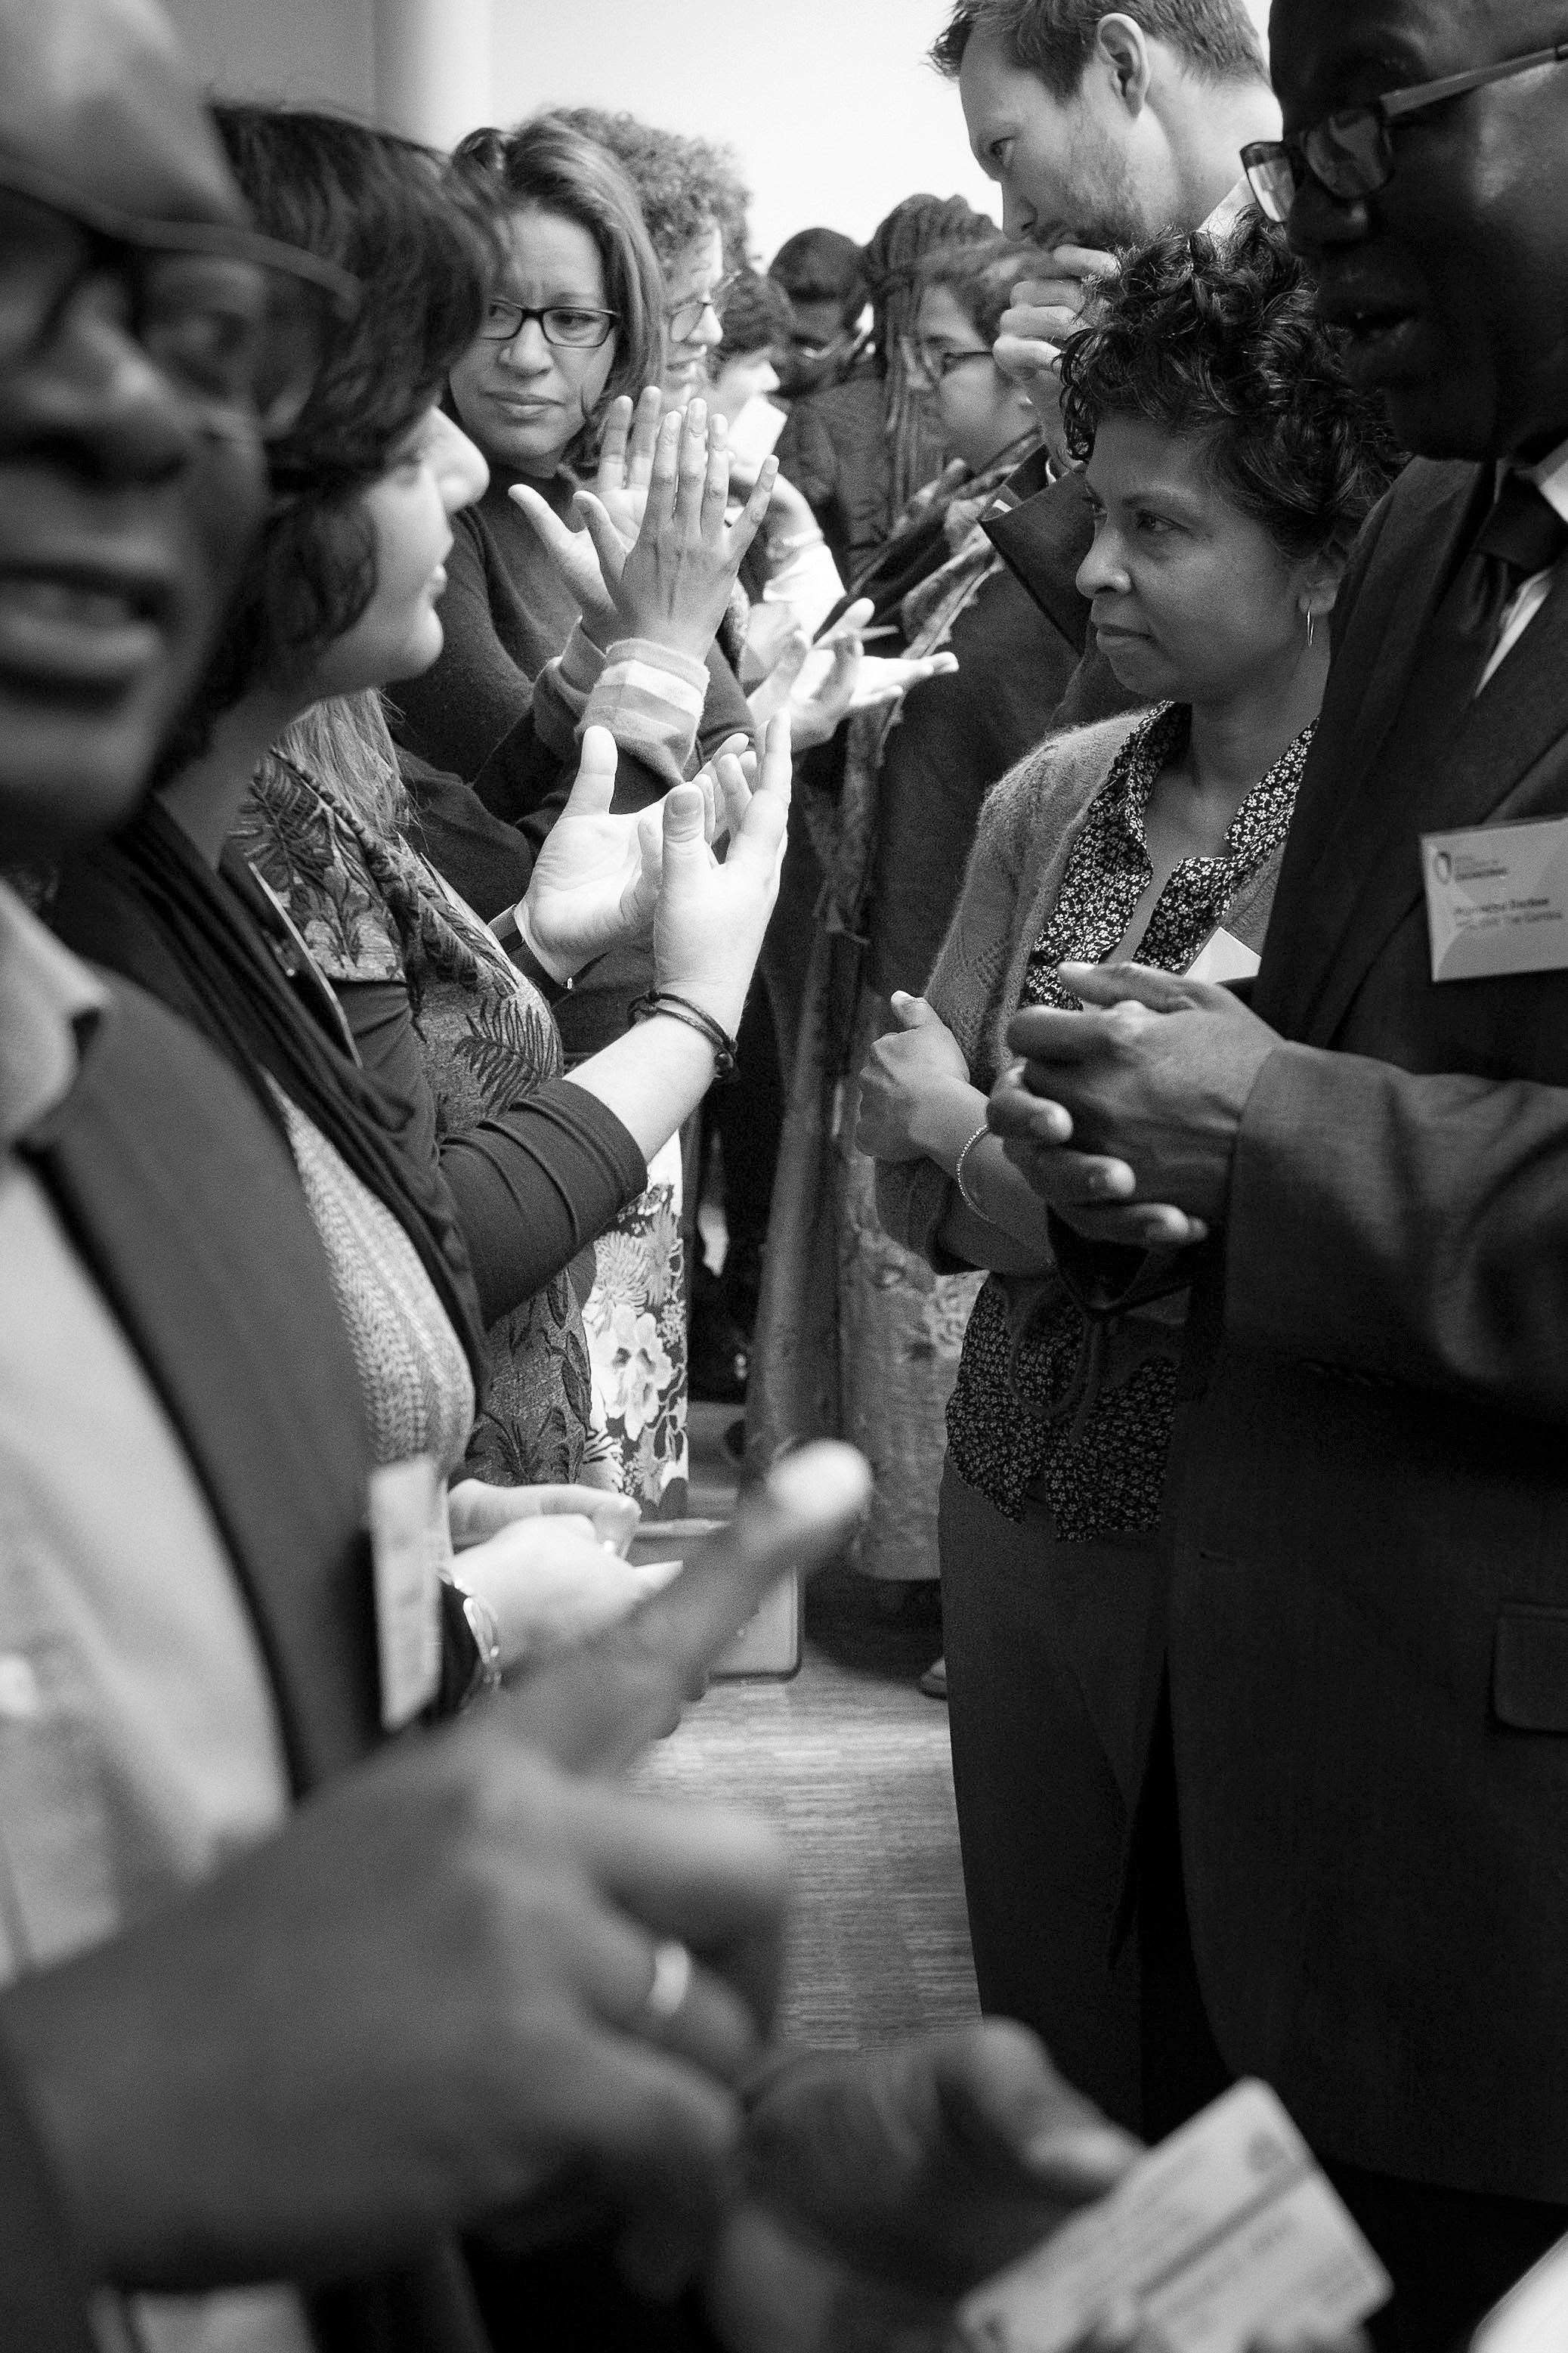 People line up to network at a Frontiers event 